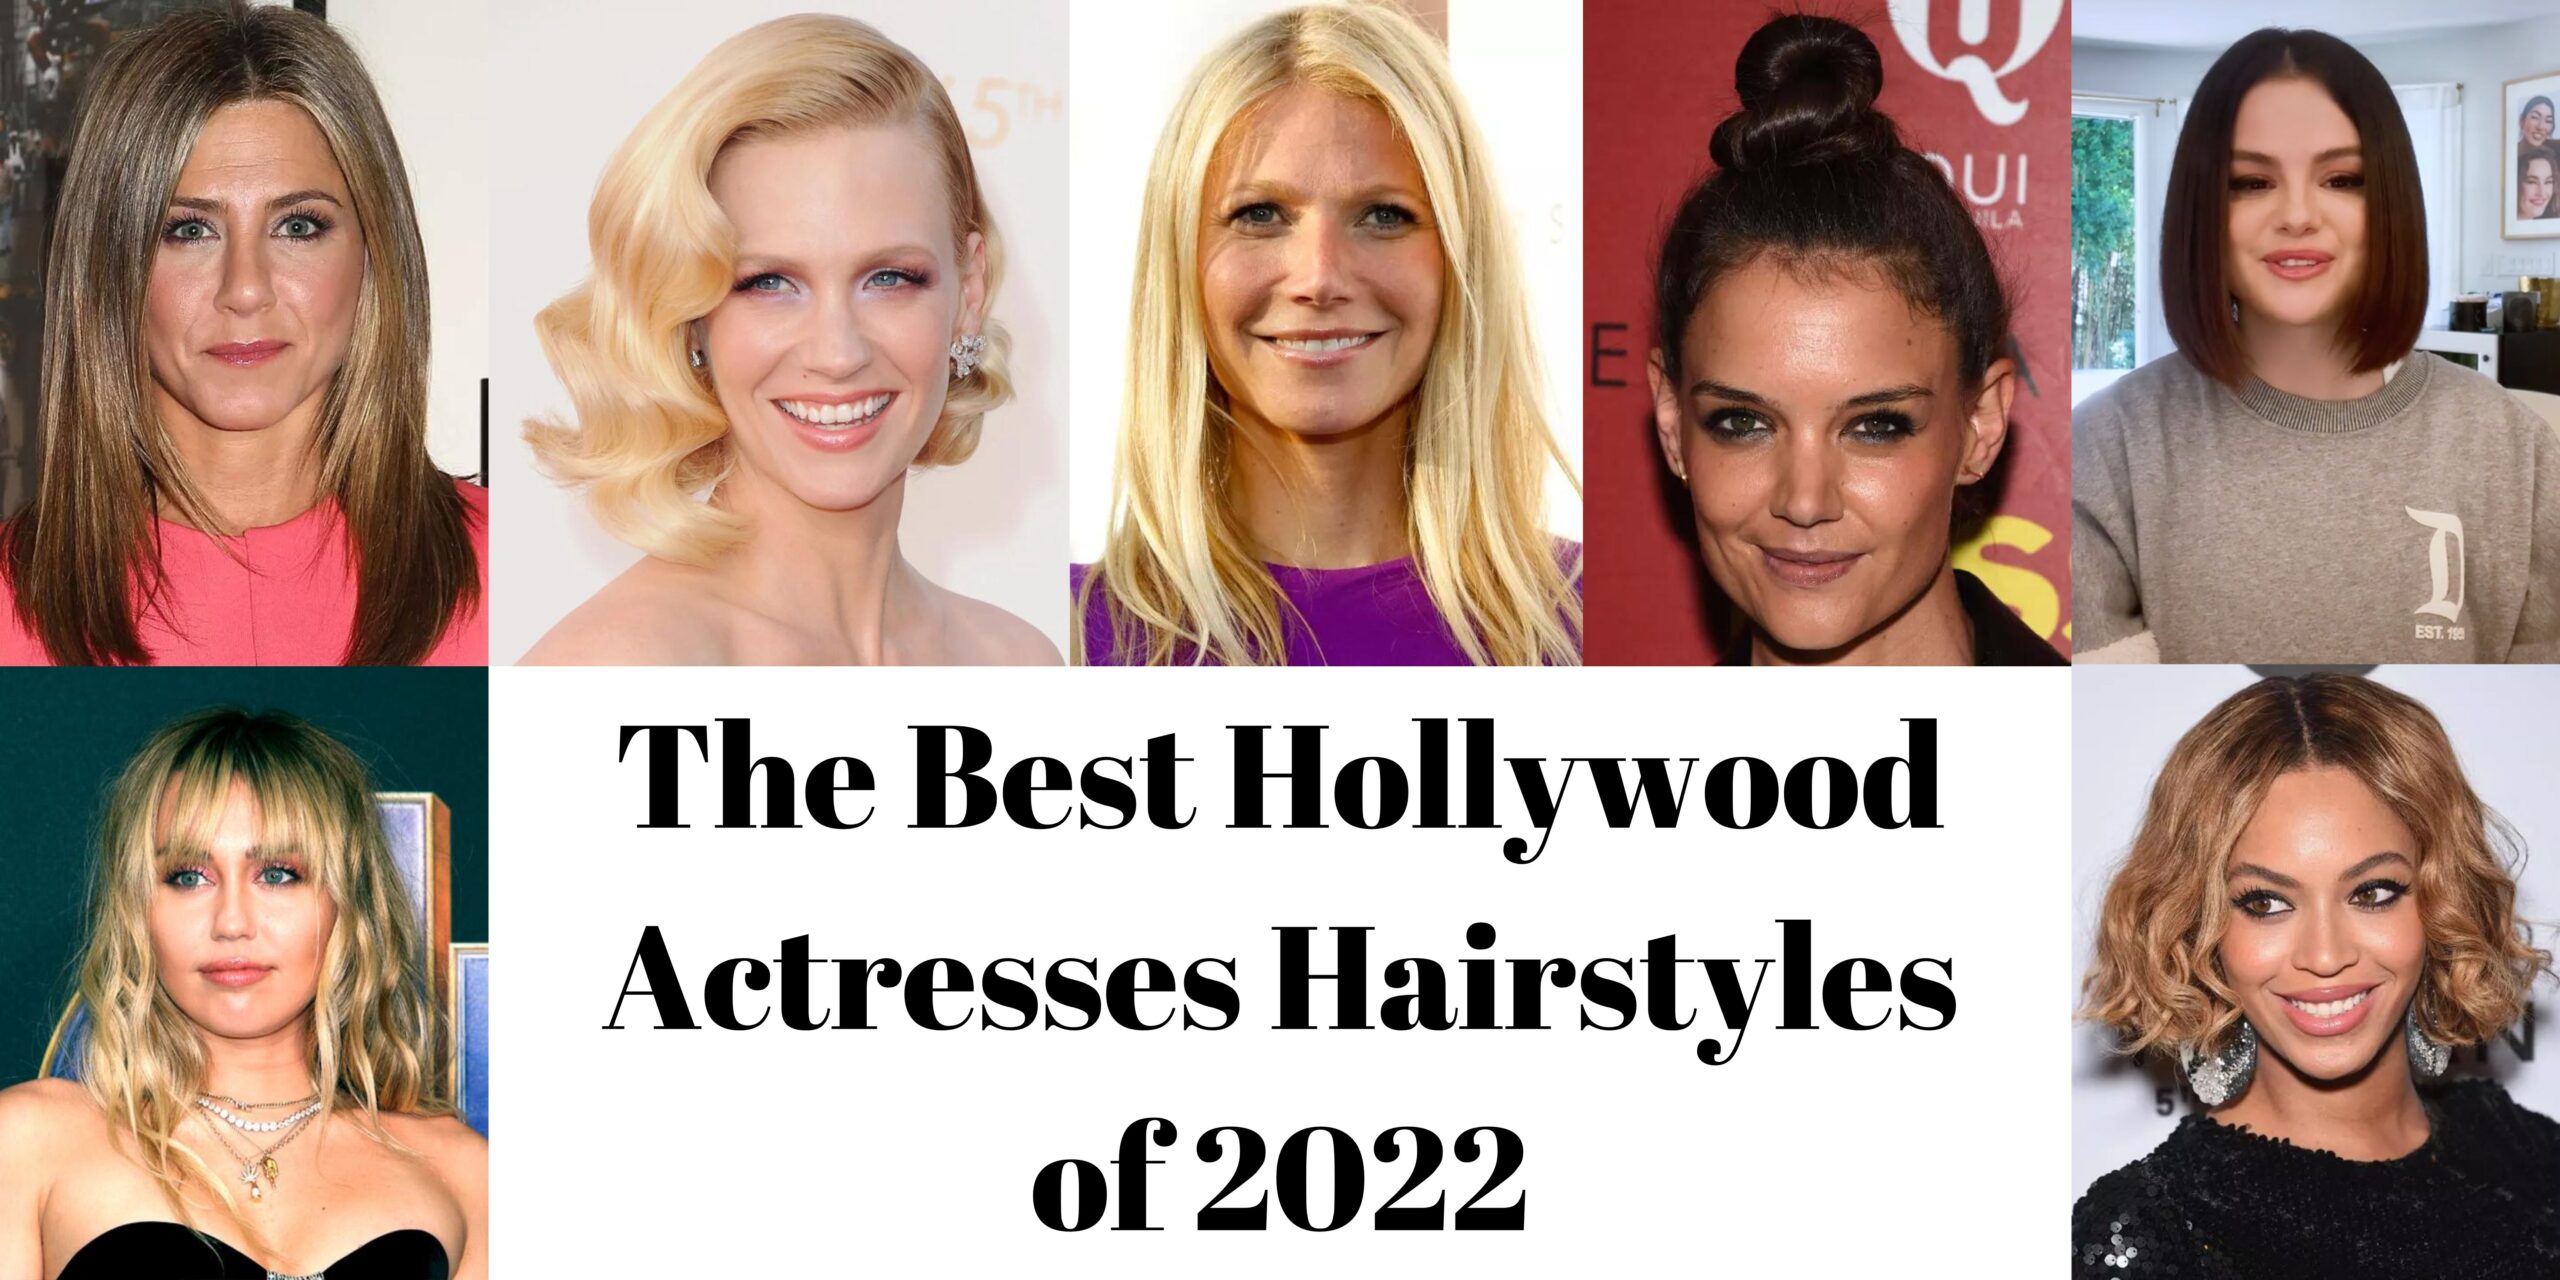 The Best Hollywood Actresses Hairstyles of 2022 (1)